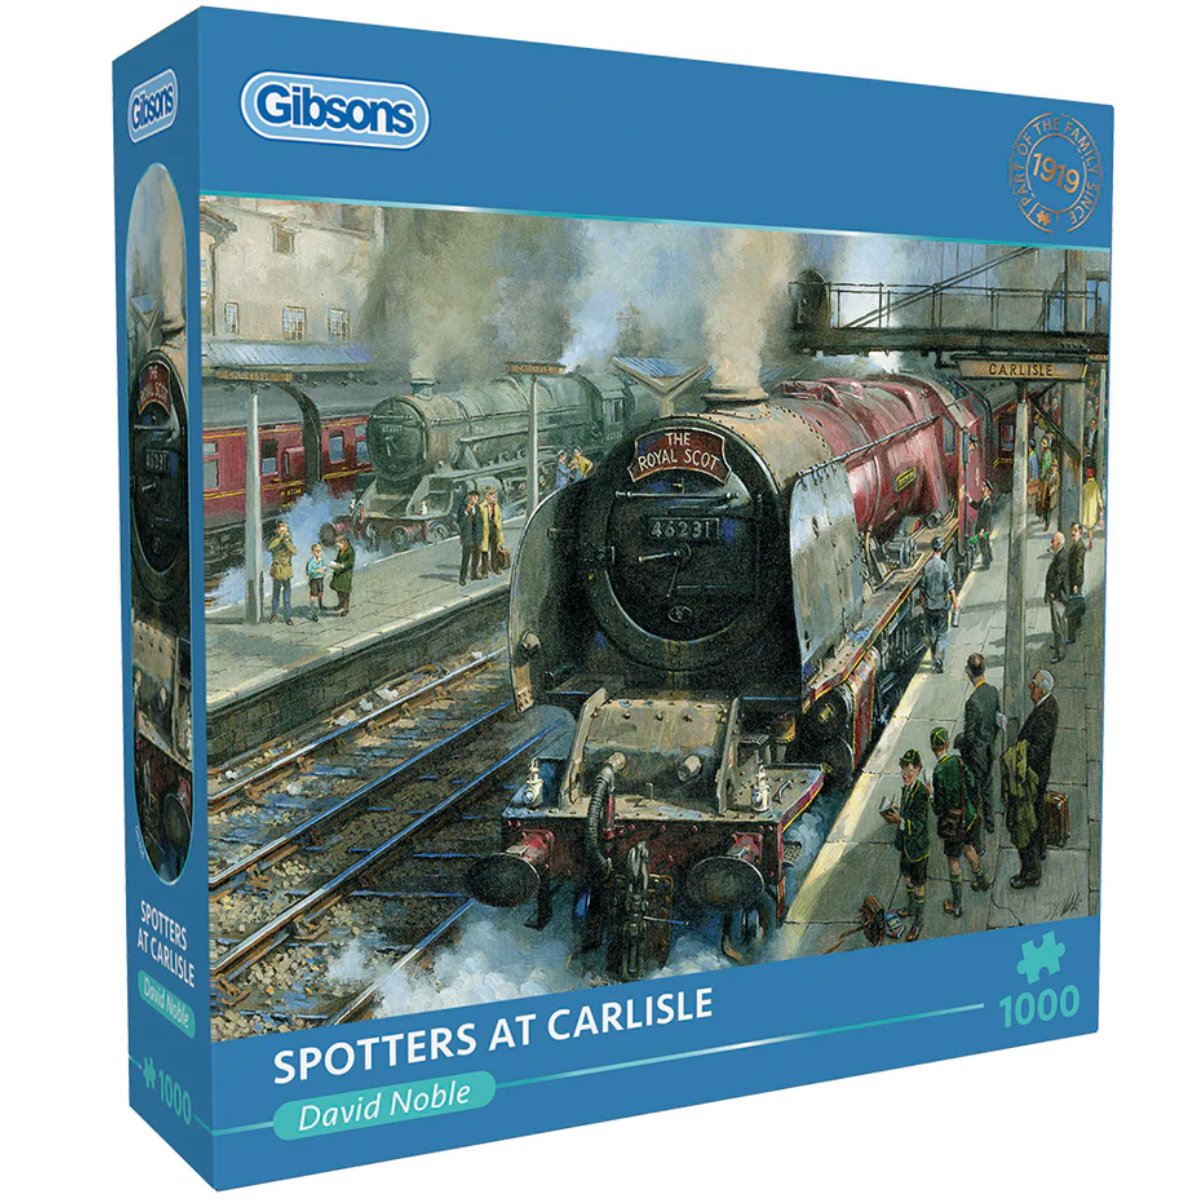 Spotters at Carlisle - Gibsons 1000 Piece Jigsaw Puzzle - Phillips Hobbies